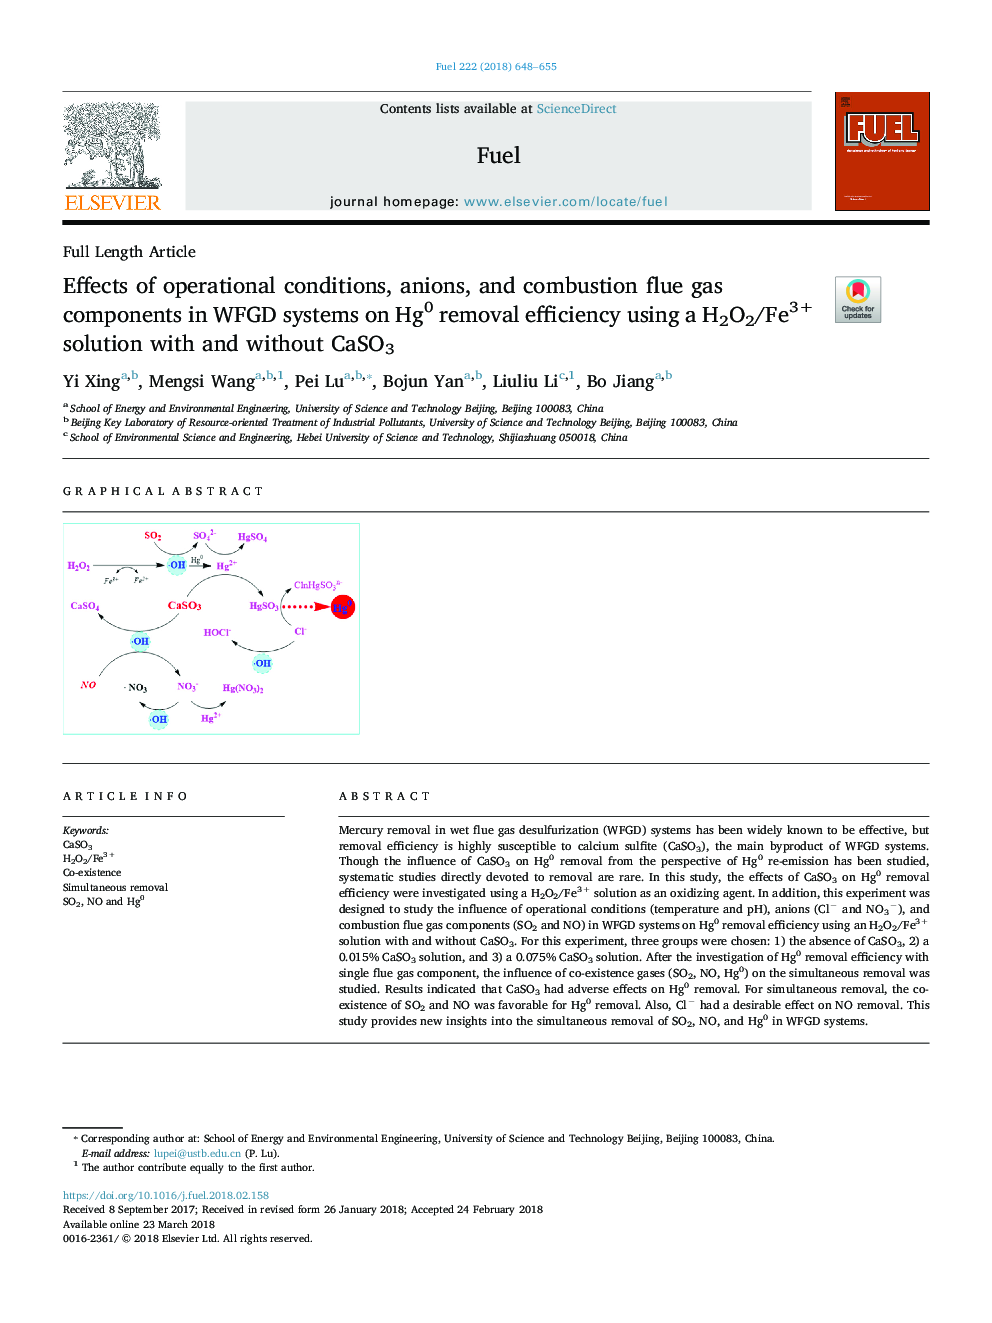 Effects of operational conditions, anions, and combustion flue gas components in WFGD systems on Hg0 removal efficiency using a H2O2/Fe3+ solution with and without CaSO3